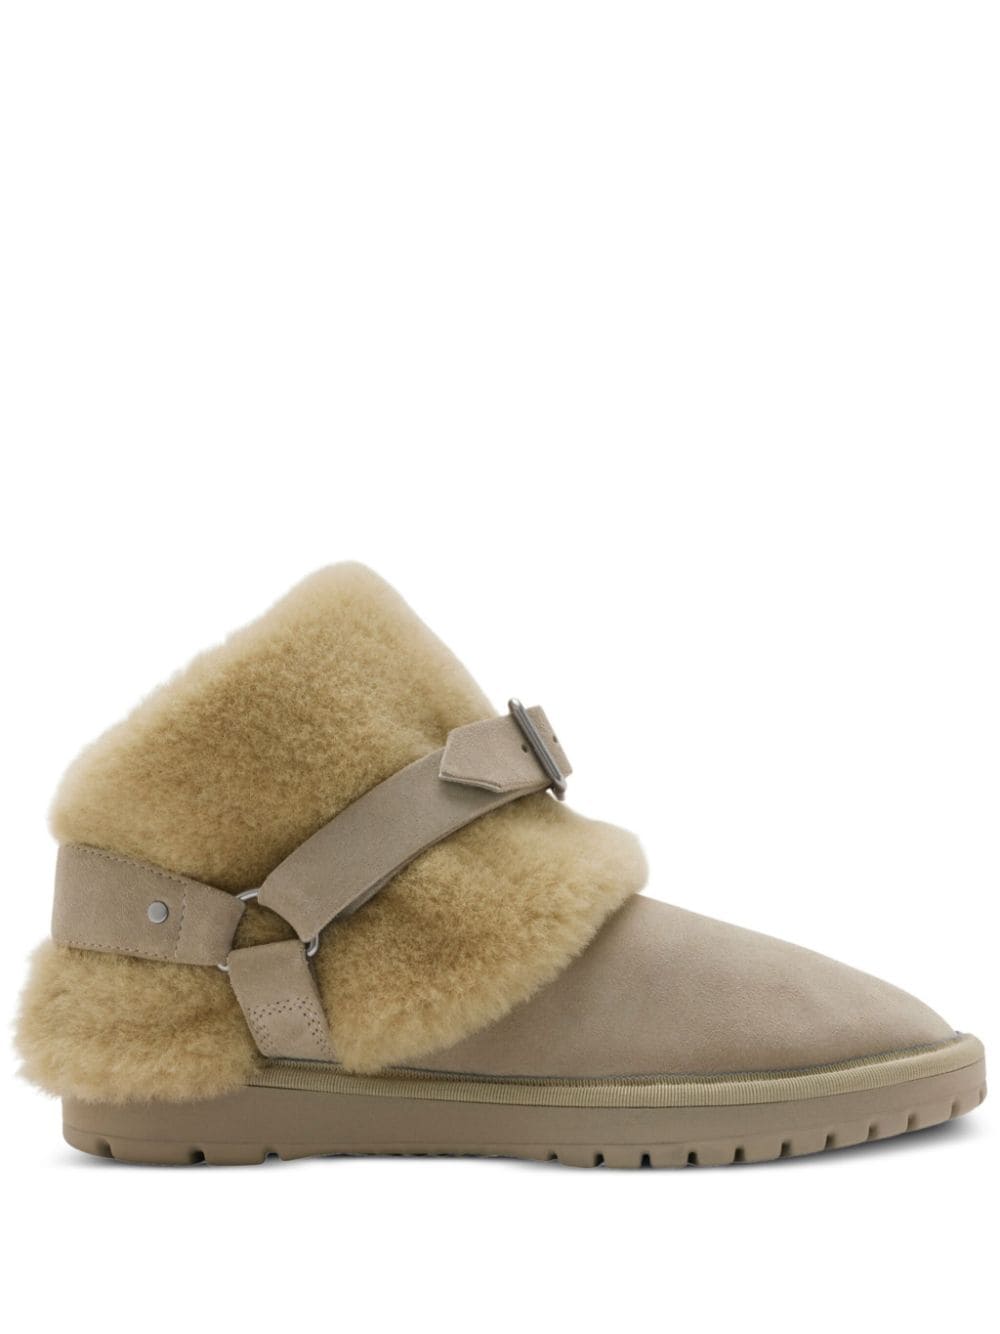 Burberry buckle-detail shearling ankle boots - Neutrals von Burberry